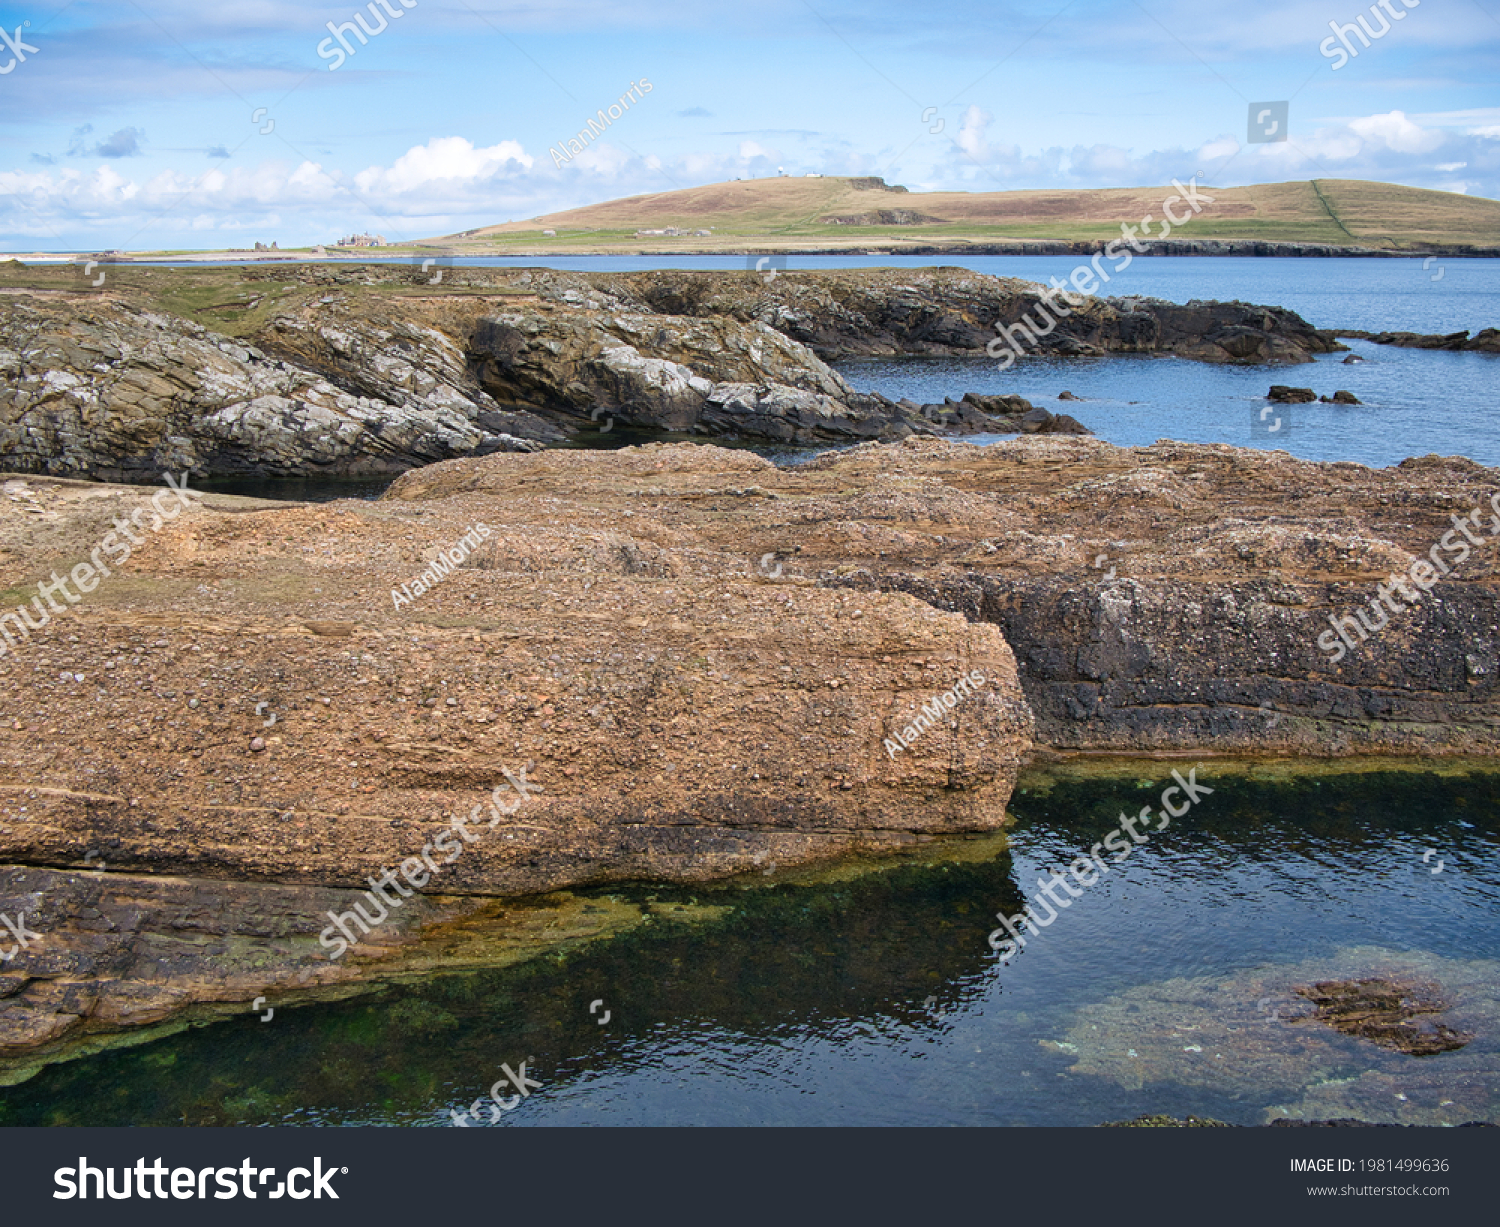 Conglomerate rock (fore) and inclined strata (behind) on the Ness of Burgi, south Shetland, UK - Hayes Sandstone Formation - Sedimentary Bedrock formed 383 to 393m years ago in the Devonian Period. #1981499636